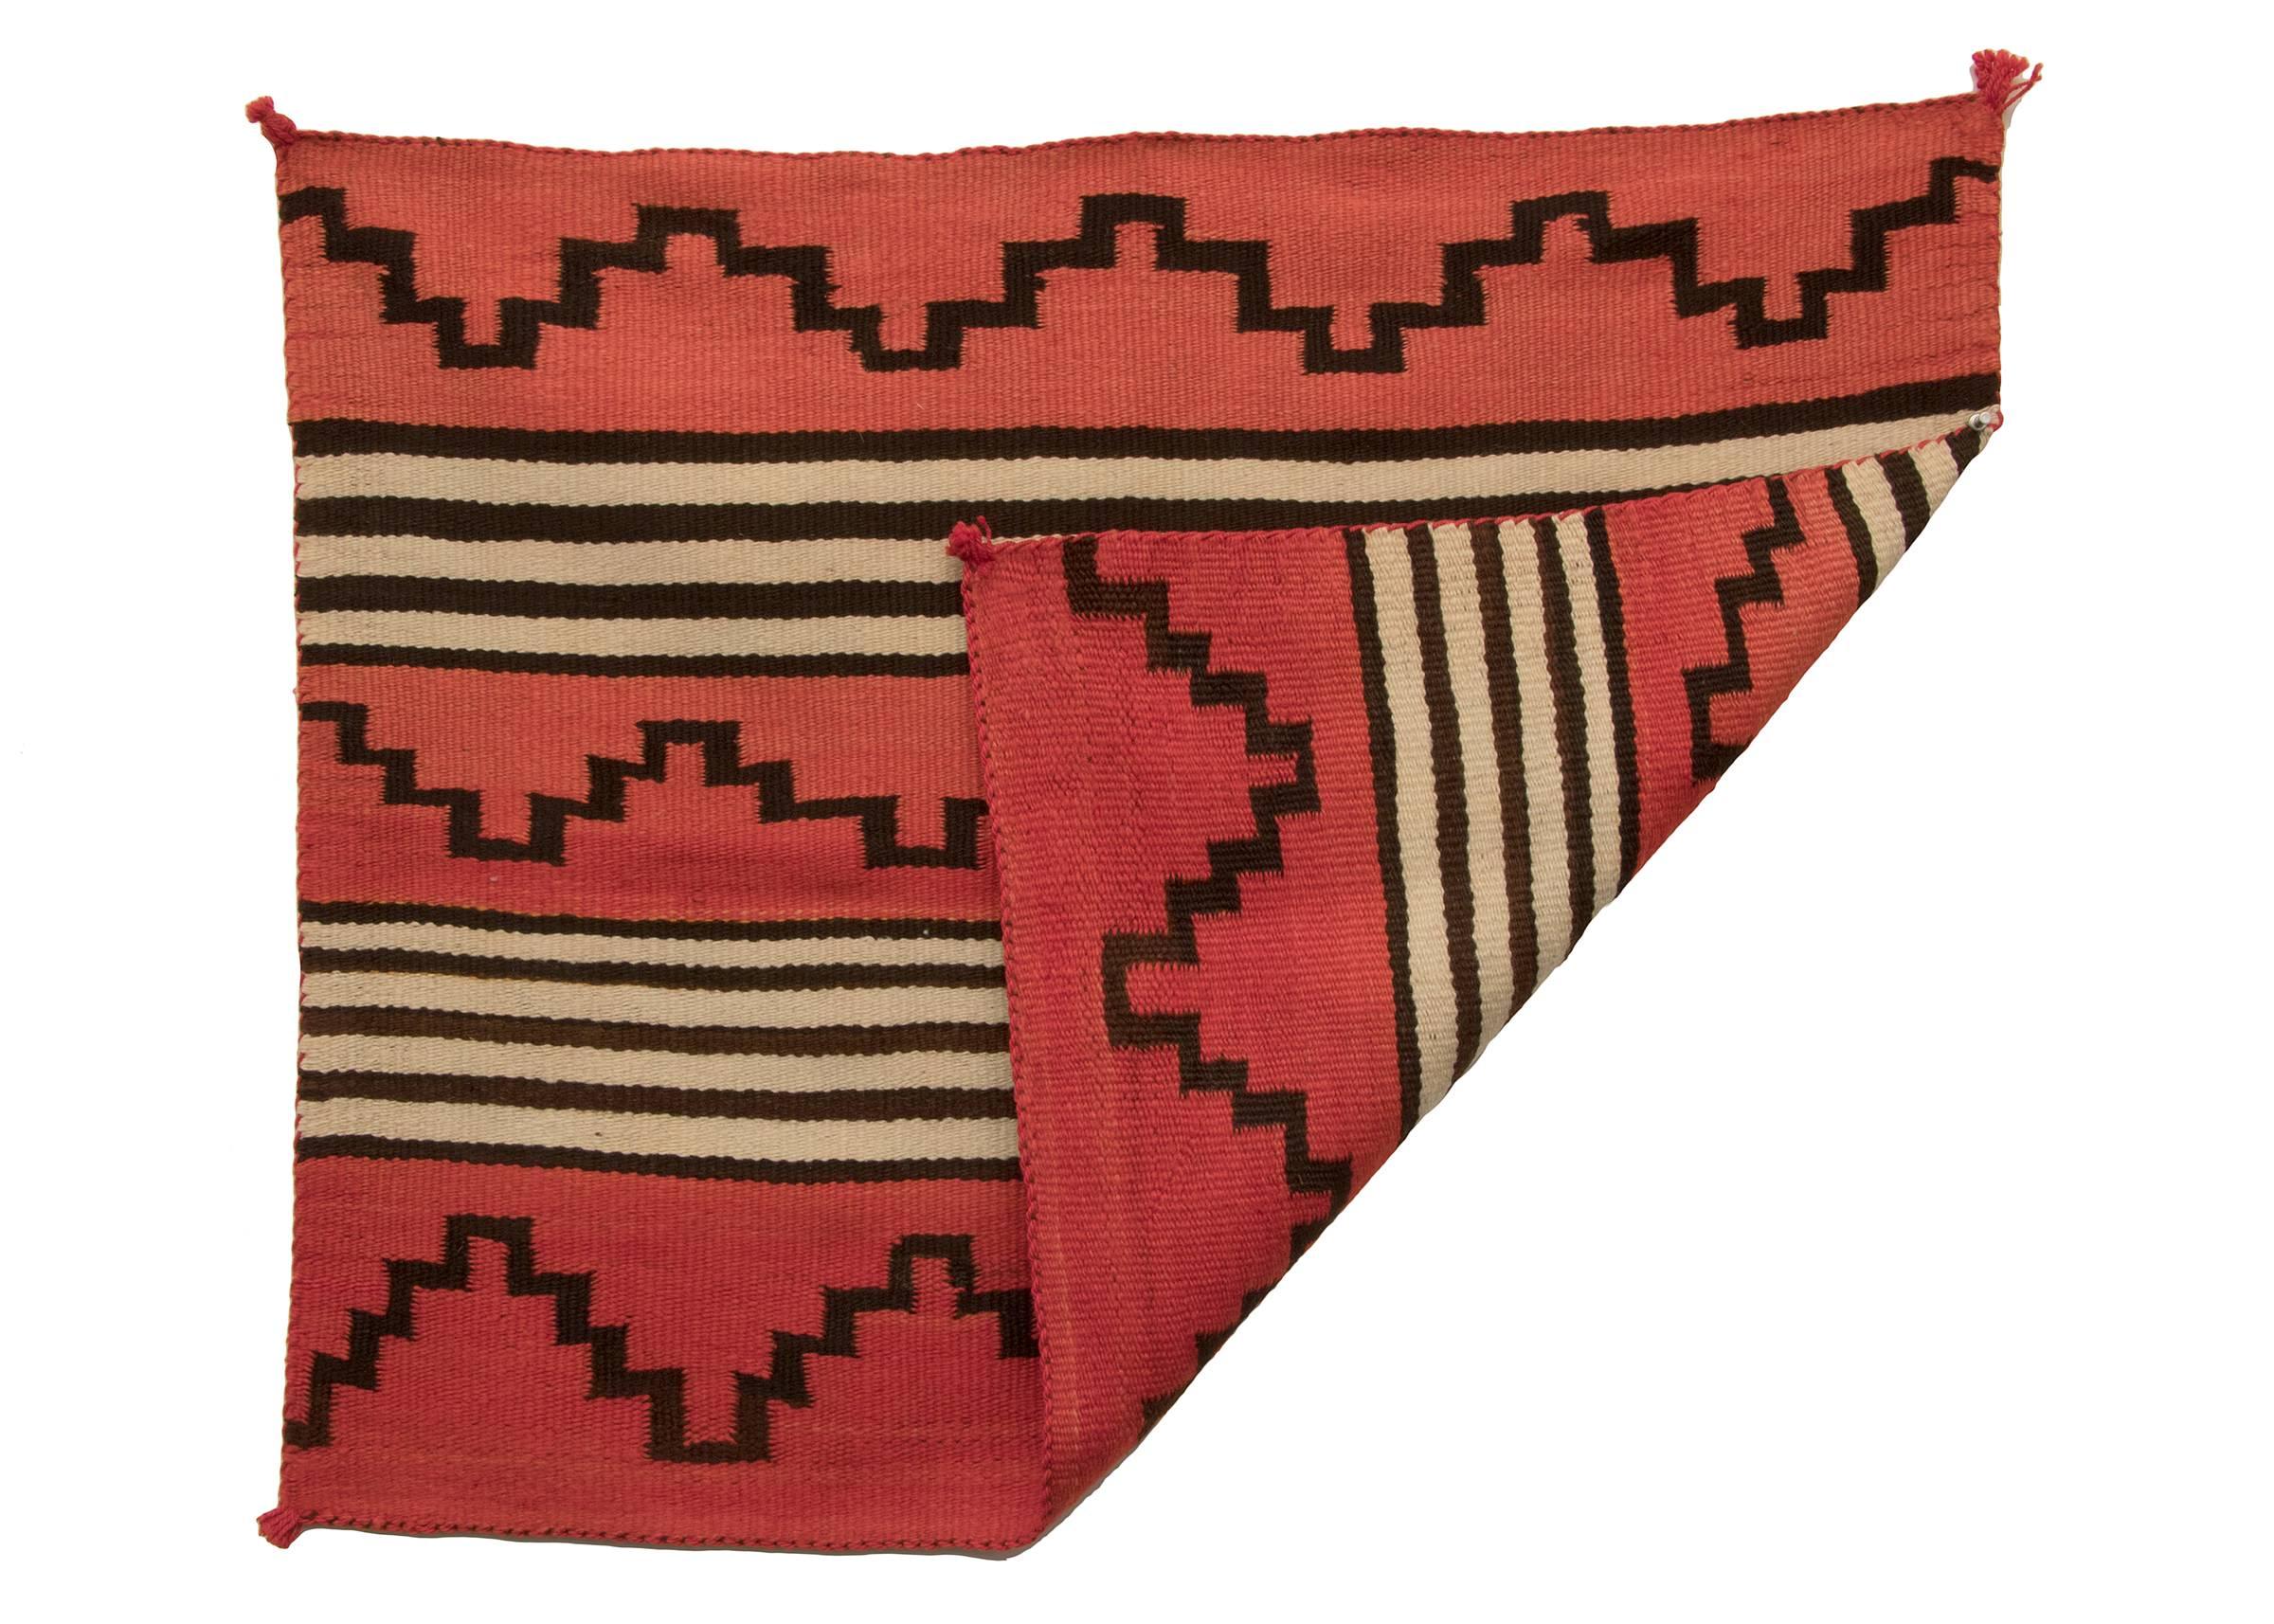 A child-sized variant of a second phase chief's wearing blanket. Woven of native hand-spun wool in natural ivory and brown fleece with aniline-dyed red.

Expedited and international shipping is available; please contact us for an estimate.